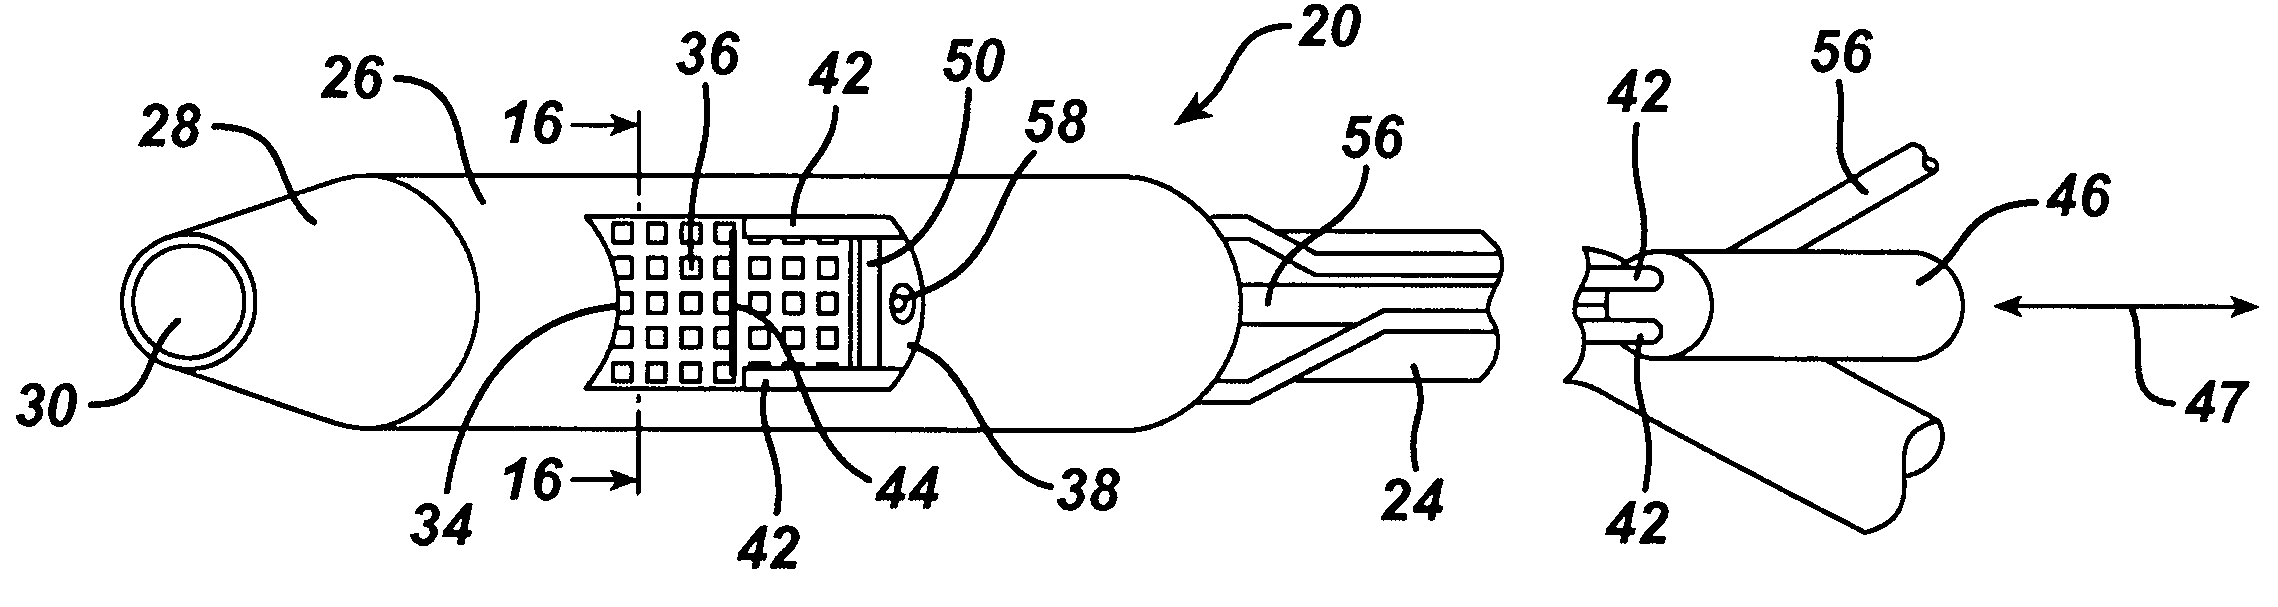 Endoscopic mucosal resection device with conductive tissue stop